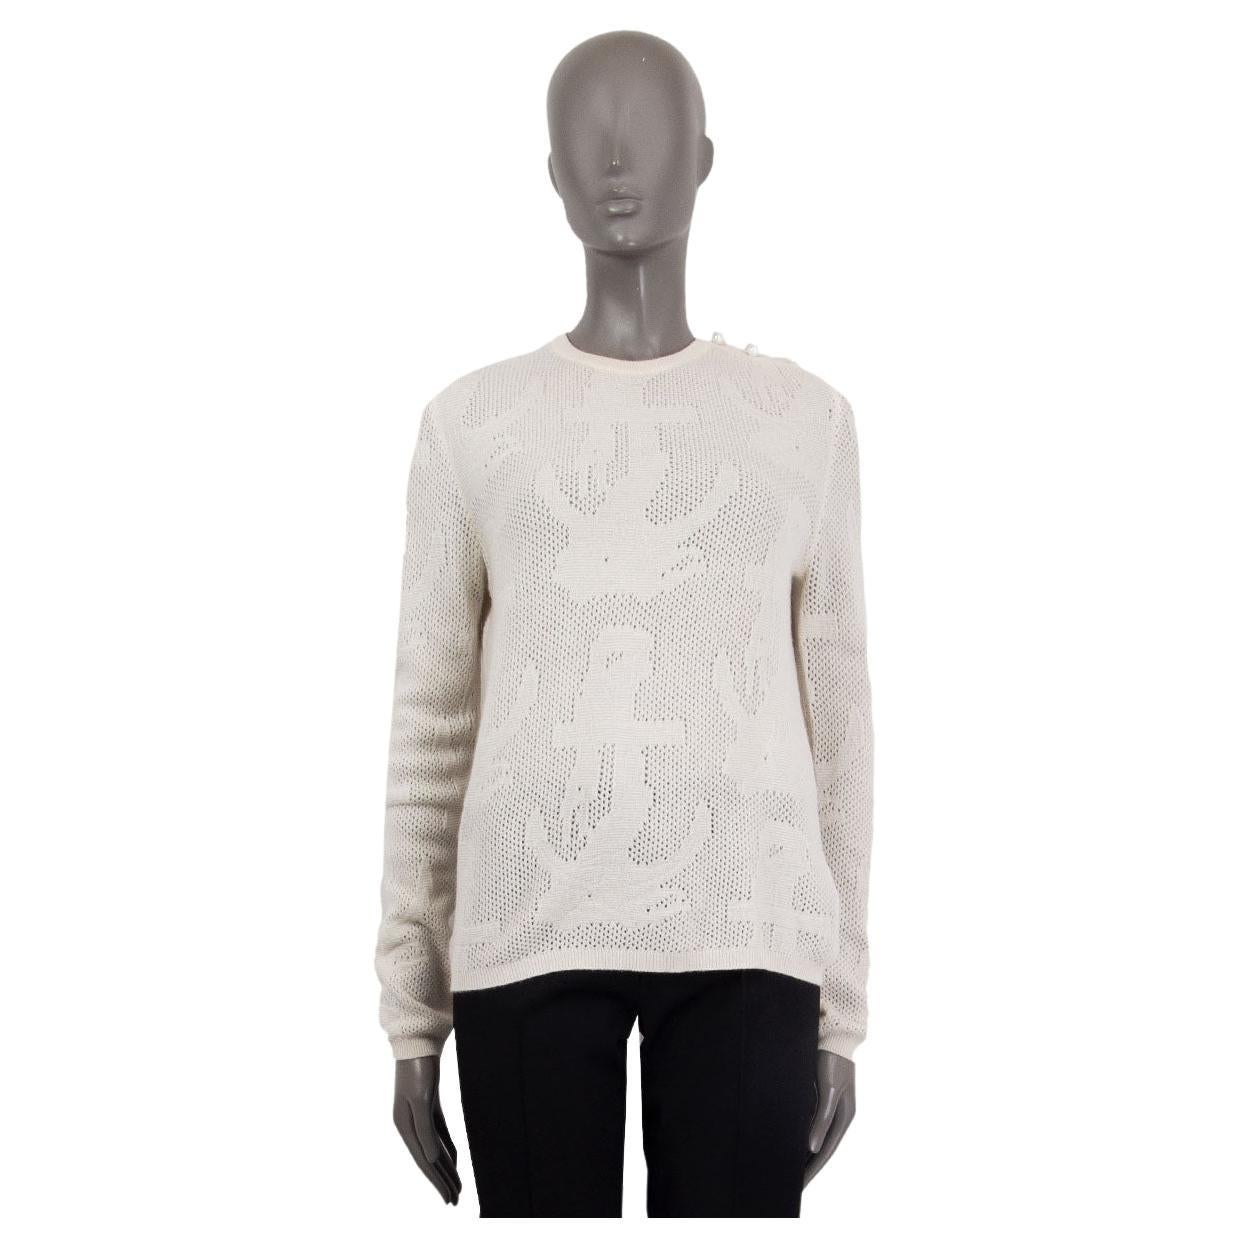 THOM BROWNE ivory cashmere ANCHOR BUTTONED NECK Sweater 3 M